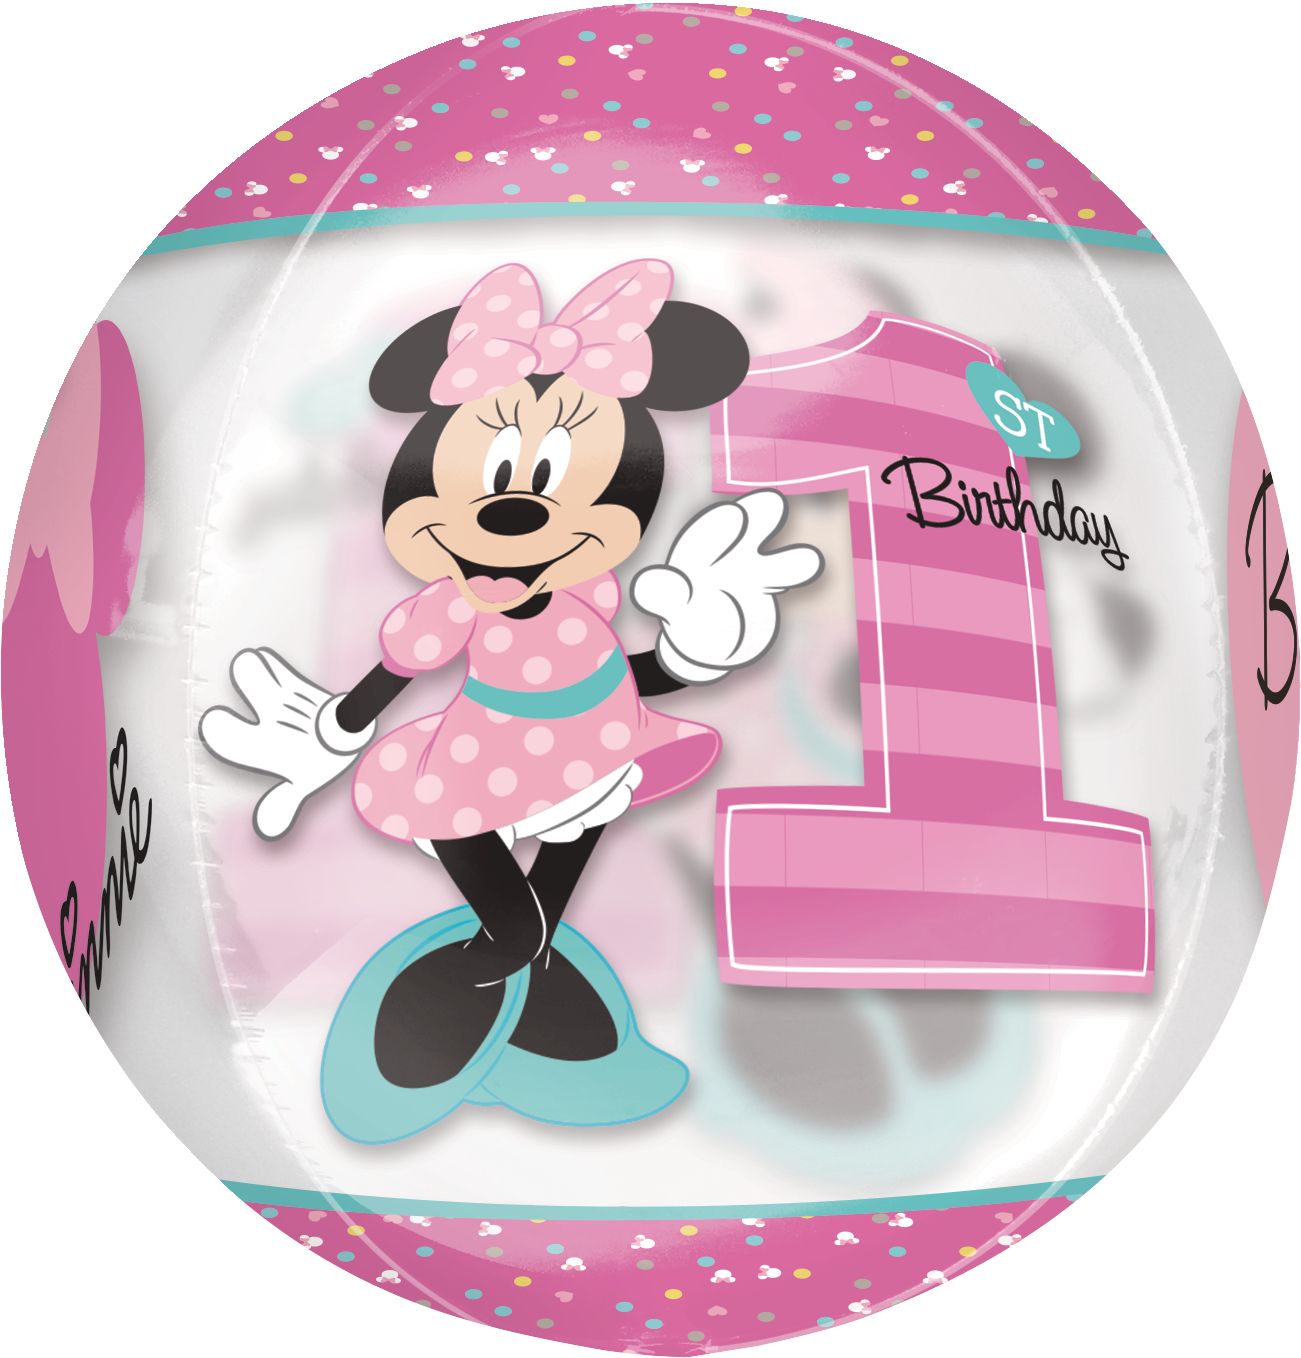 Disney Minnie Mouse 1st Birthday Orbz Transparent Print Foil Balloon,  Pink, 18-in, Helium Inflation & Ribbon Included for Birthday Party